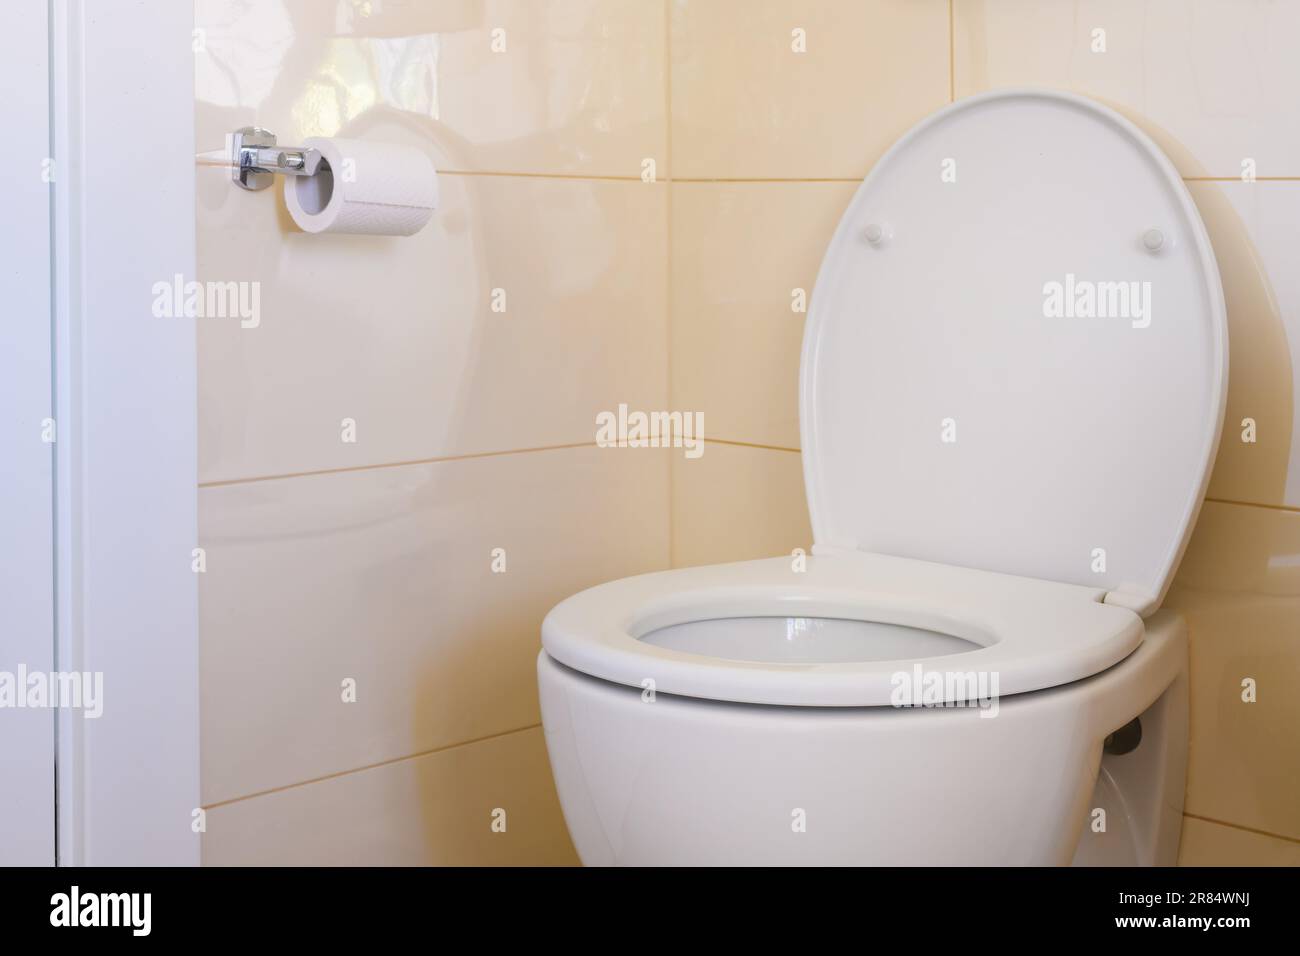 Toilet seat and roll of paper in restroom, selective focus Stock Photo